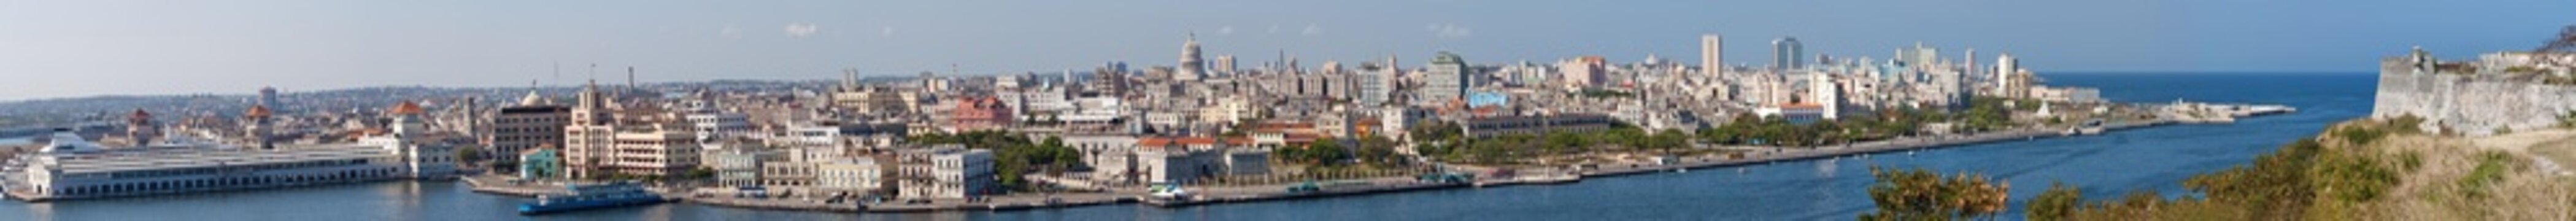 Highly detailed panoramic view of Havana